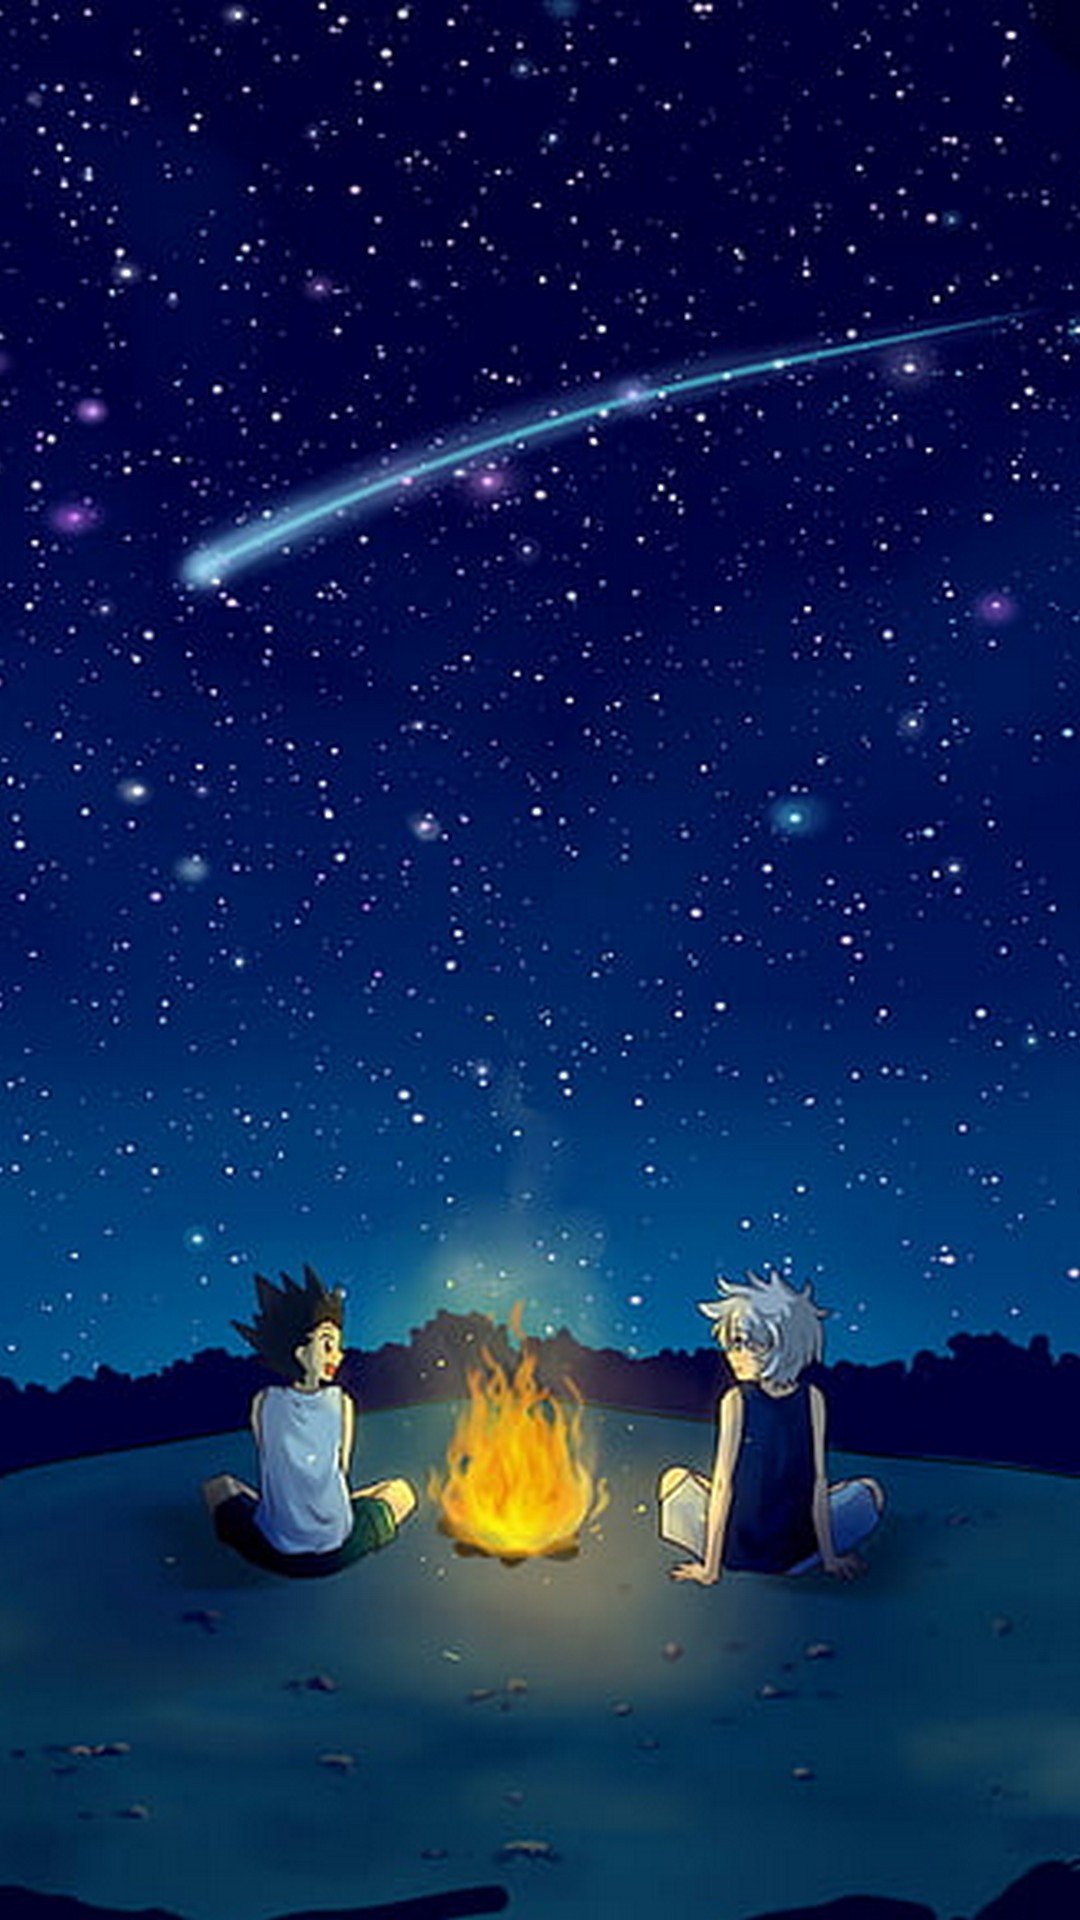 Android Wallpaper Gon And Killua with high-resolution 1080x1920 pixel. You can use this wallpaper for your Android backgrounds, Tablet, Samsung Screensavers, Mobile Phone Lock Screen and another Smartphones device